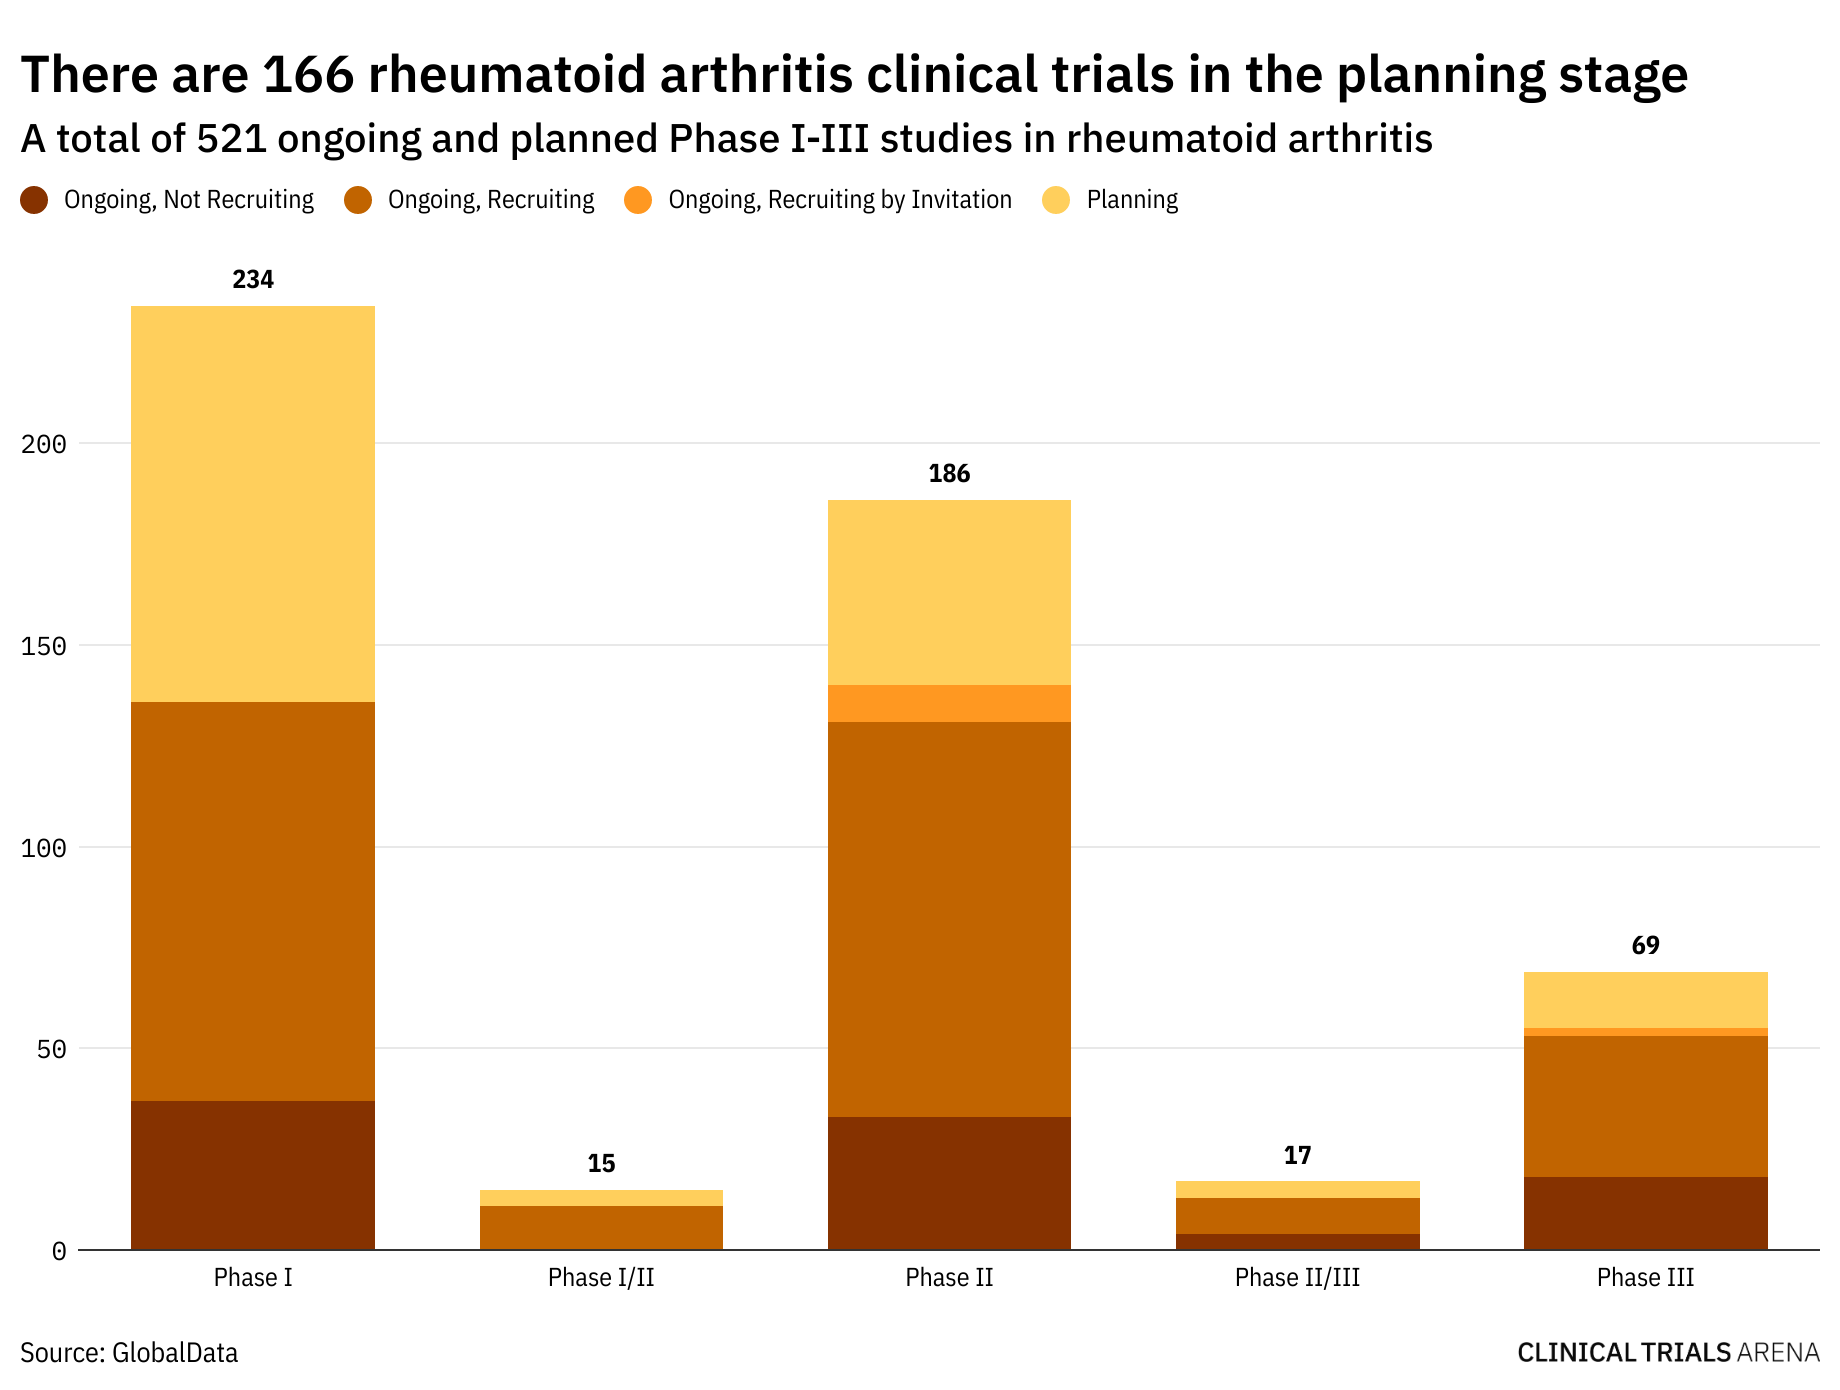 Should rheumatoid arthritis trials exclude patients based on their Covid-19 vaccine status?